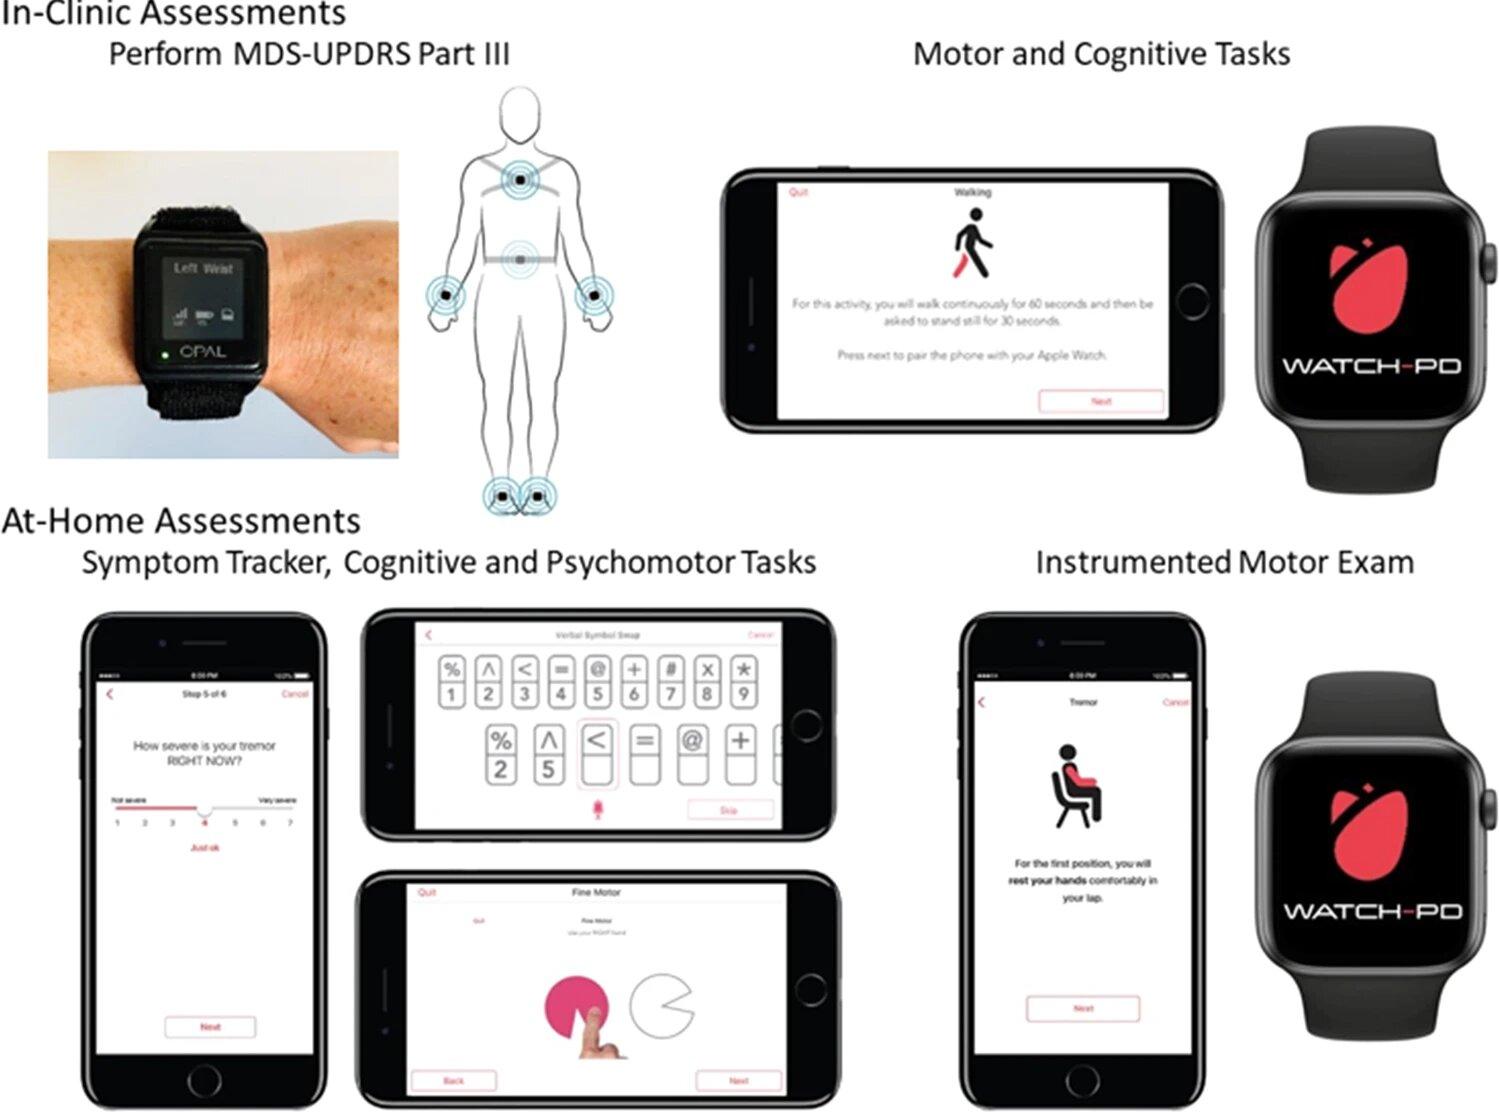 Smartwatches may be key to development of new Parkinson’s treatments